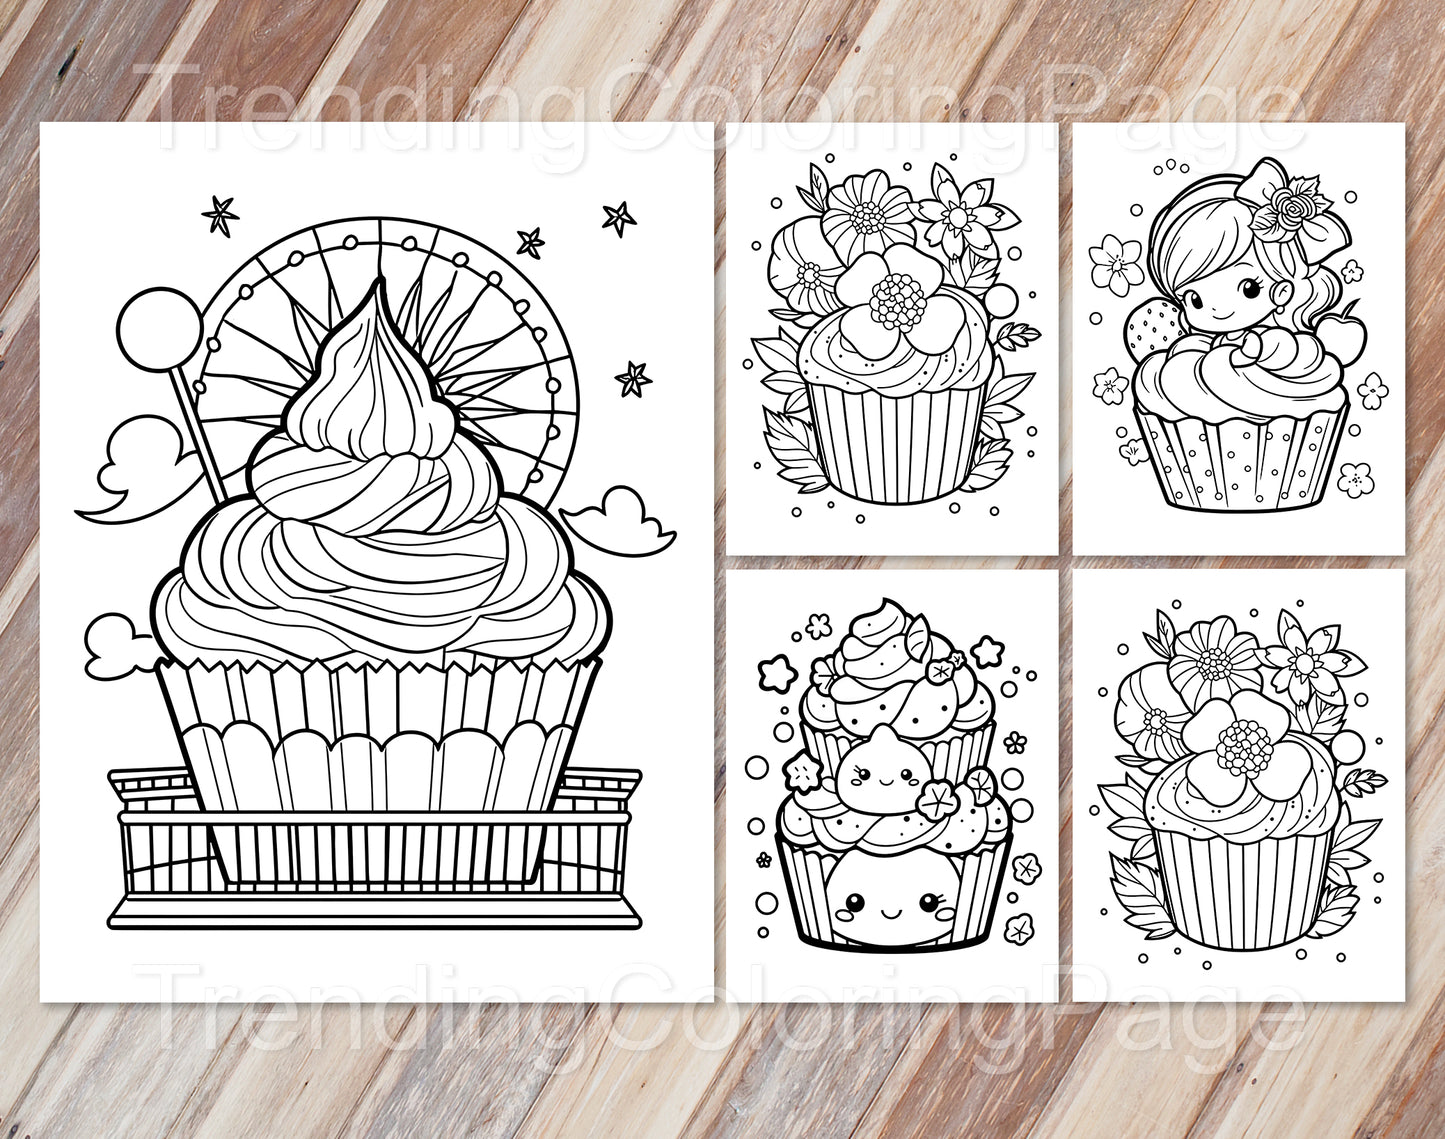 30 Adorable Cupcake Coloring Pages - Instant Download - Printable PDF